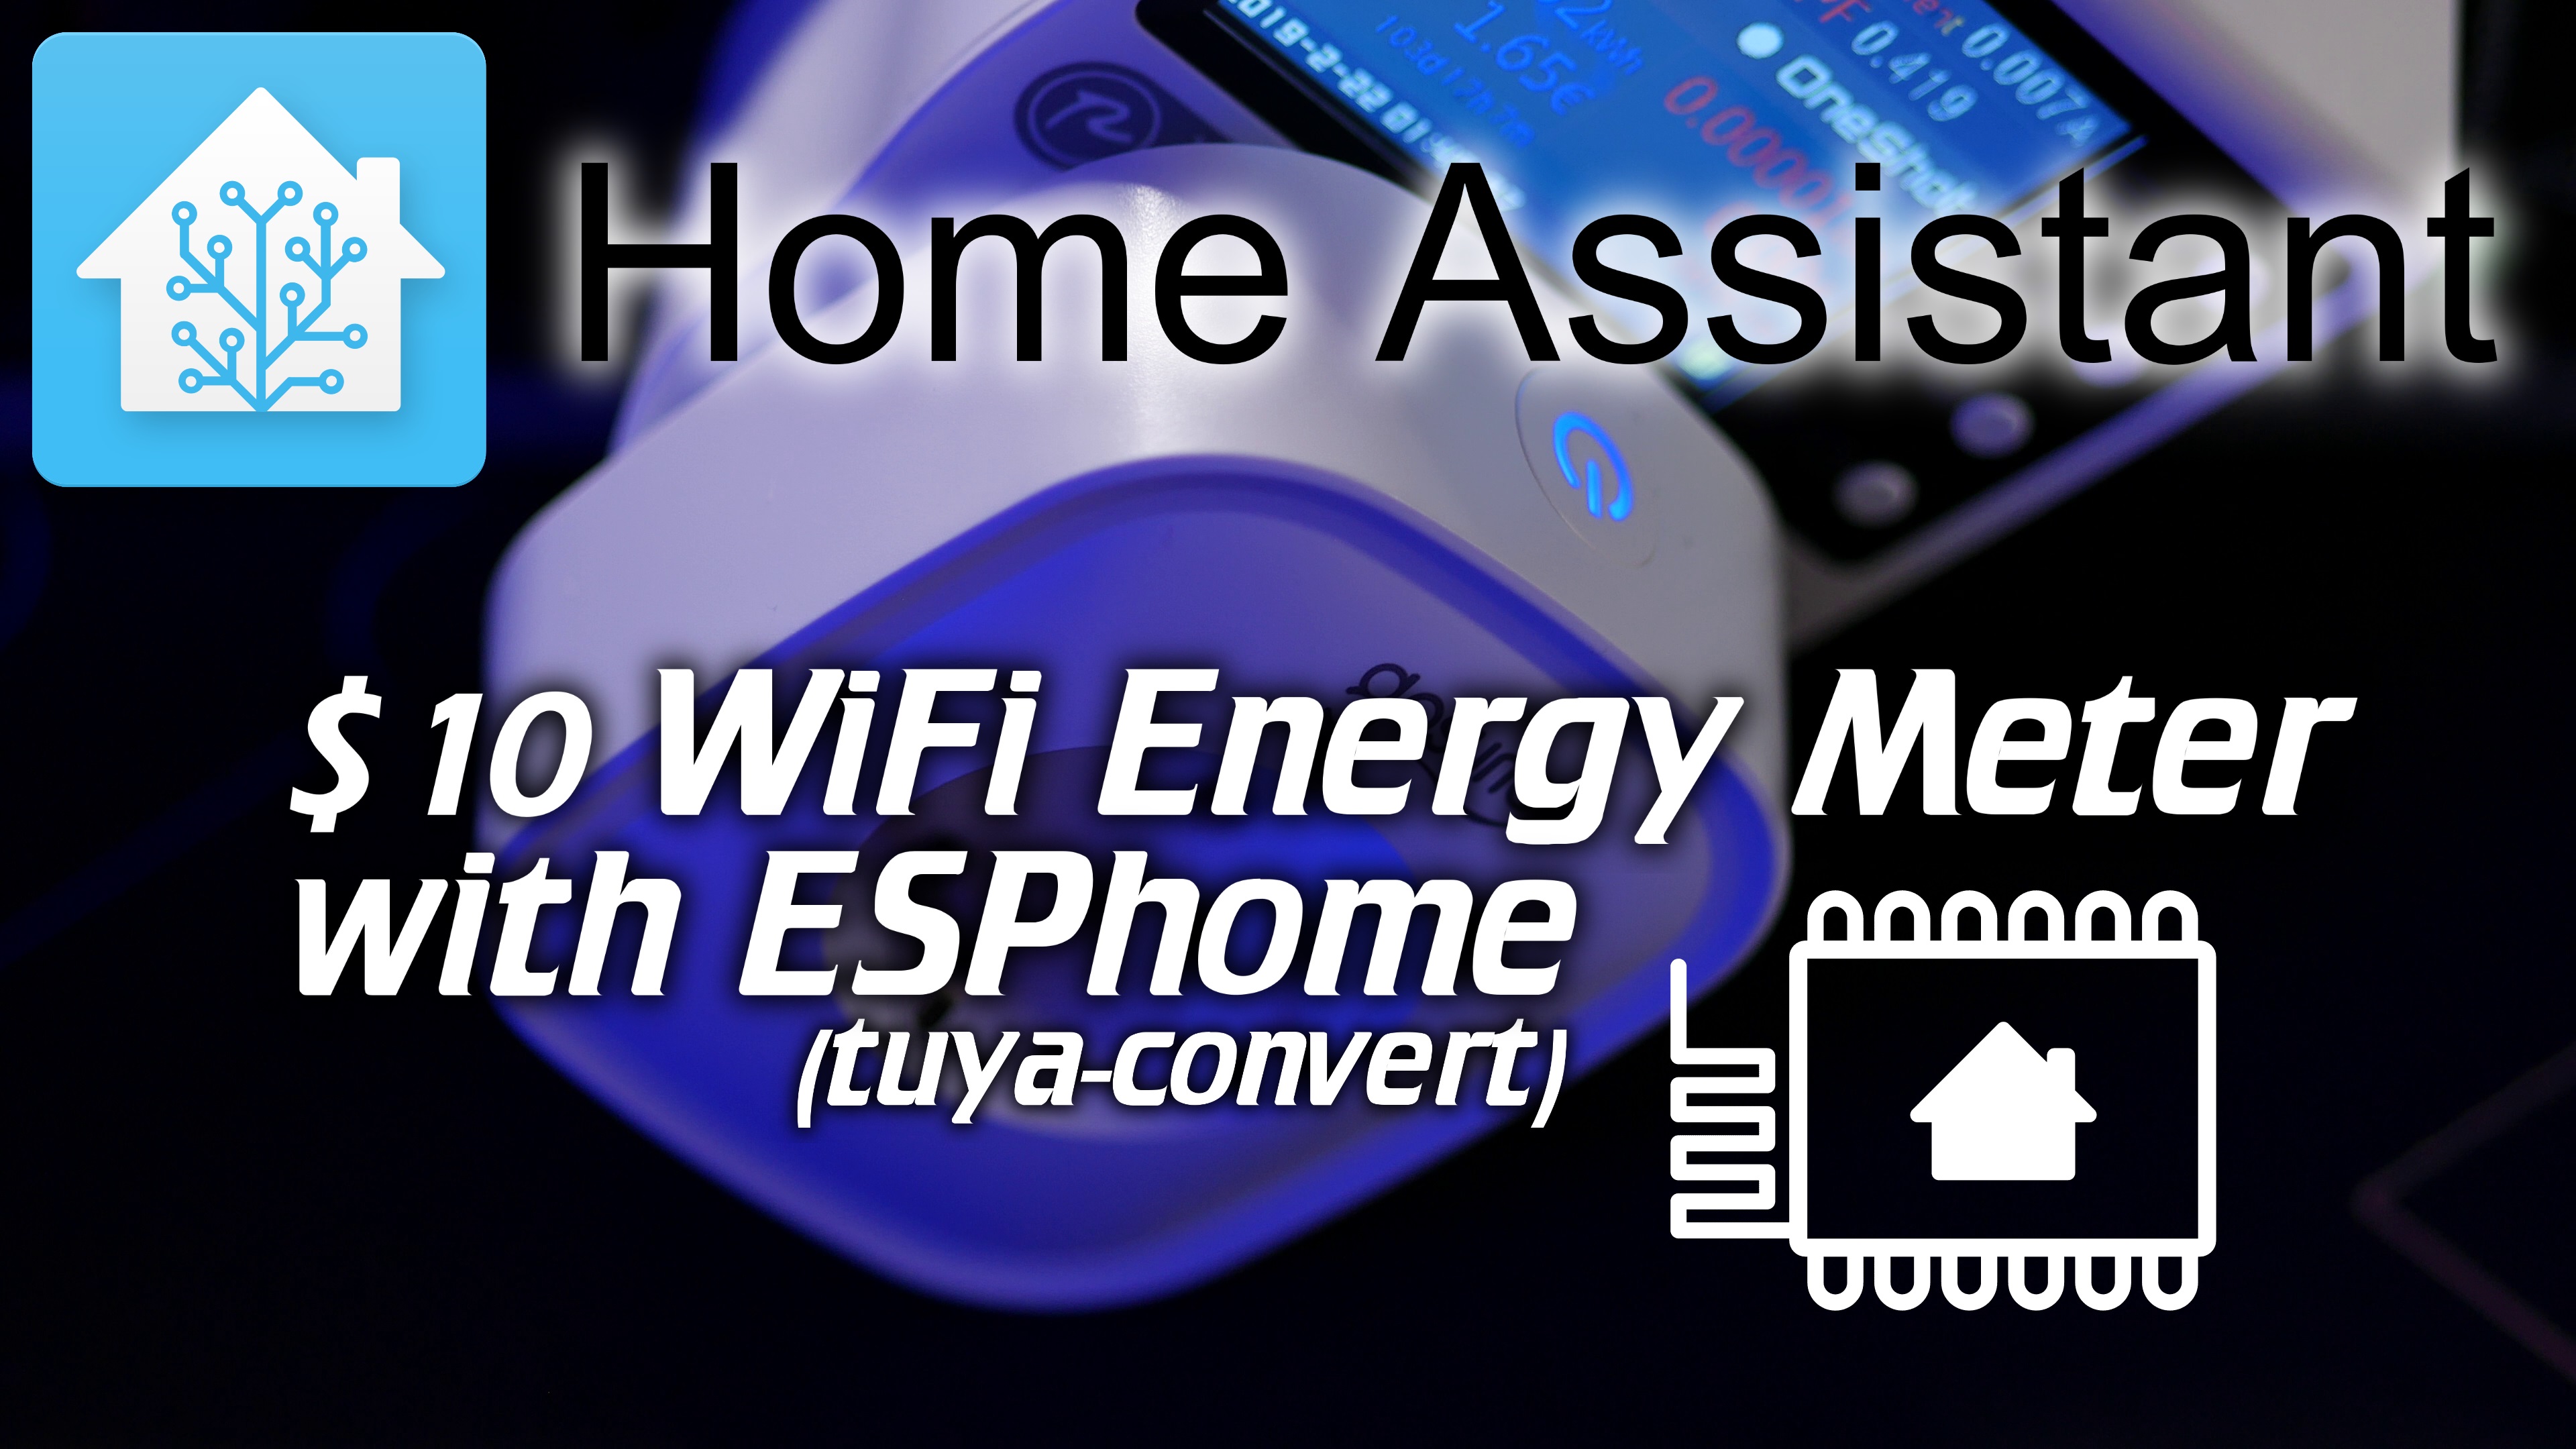 WiFi smart home assistant Tuya smart temperature and humidity